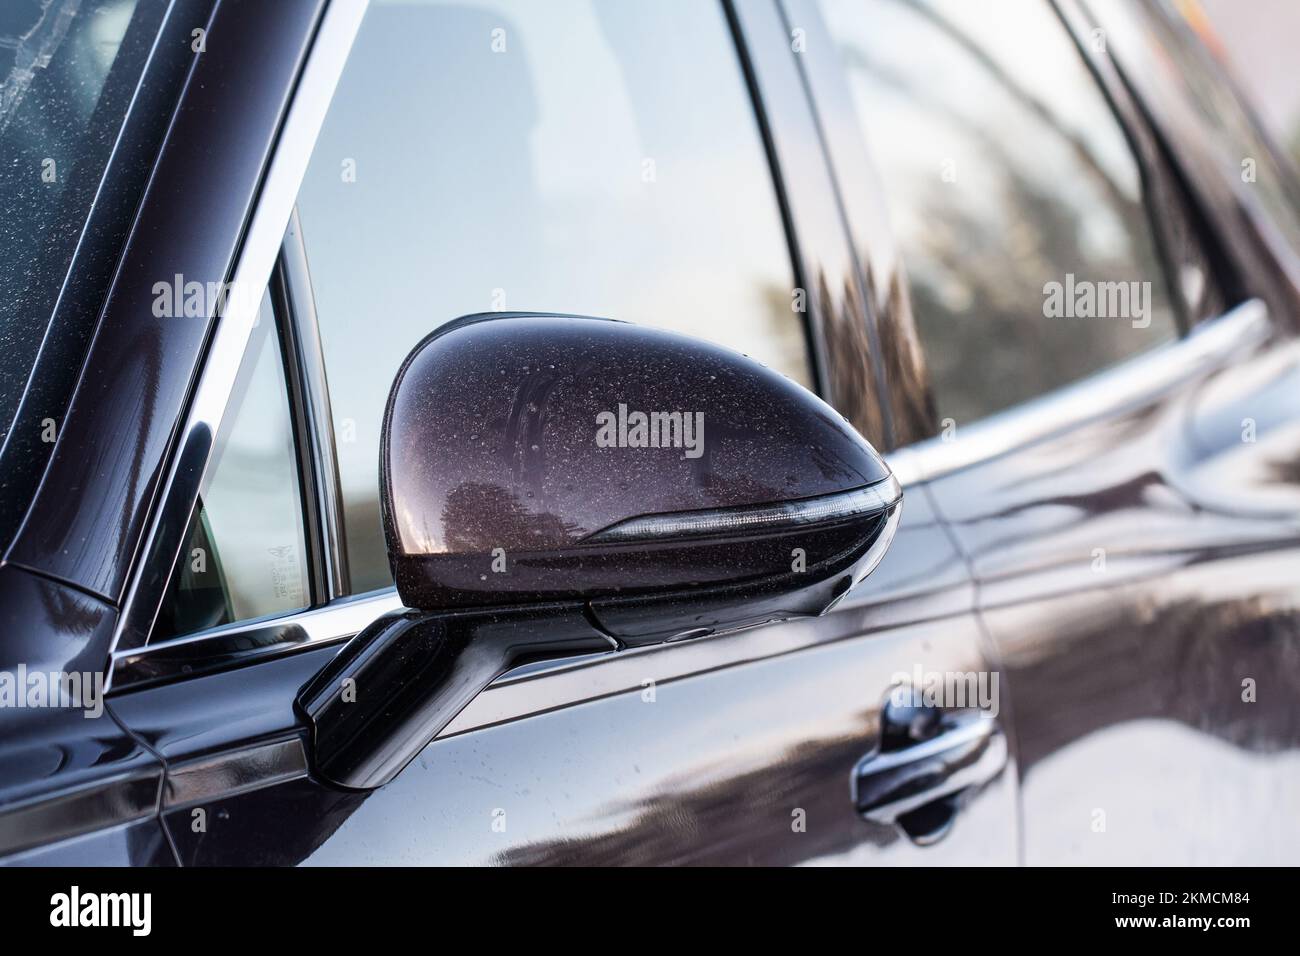 Close up front view of car side mirror. Front rear view mirror on the car window. Car exterior details. Stock Photo